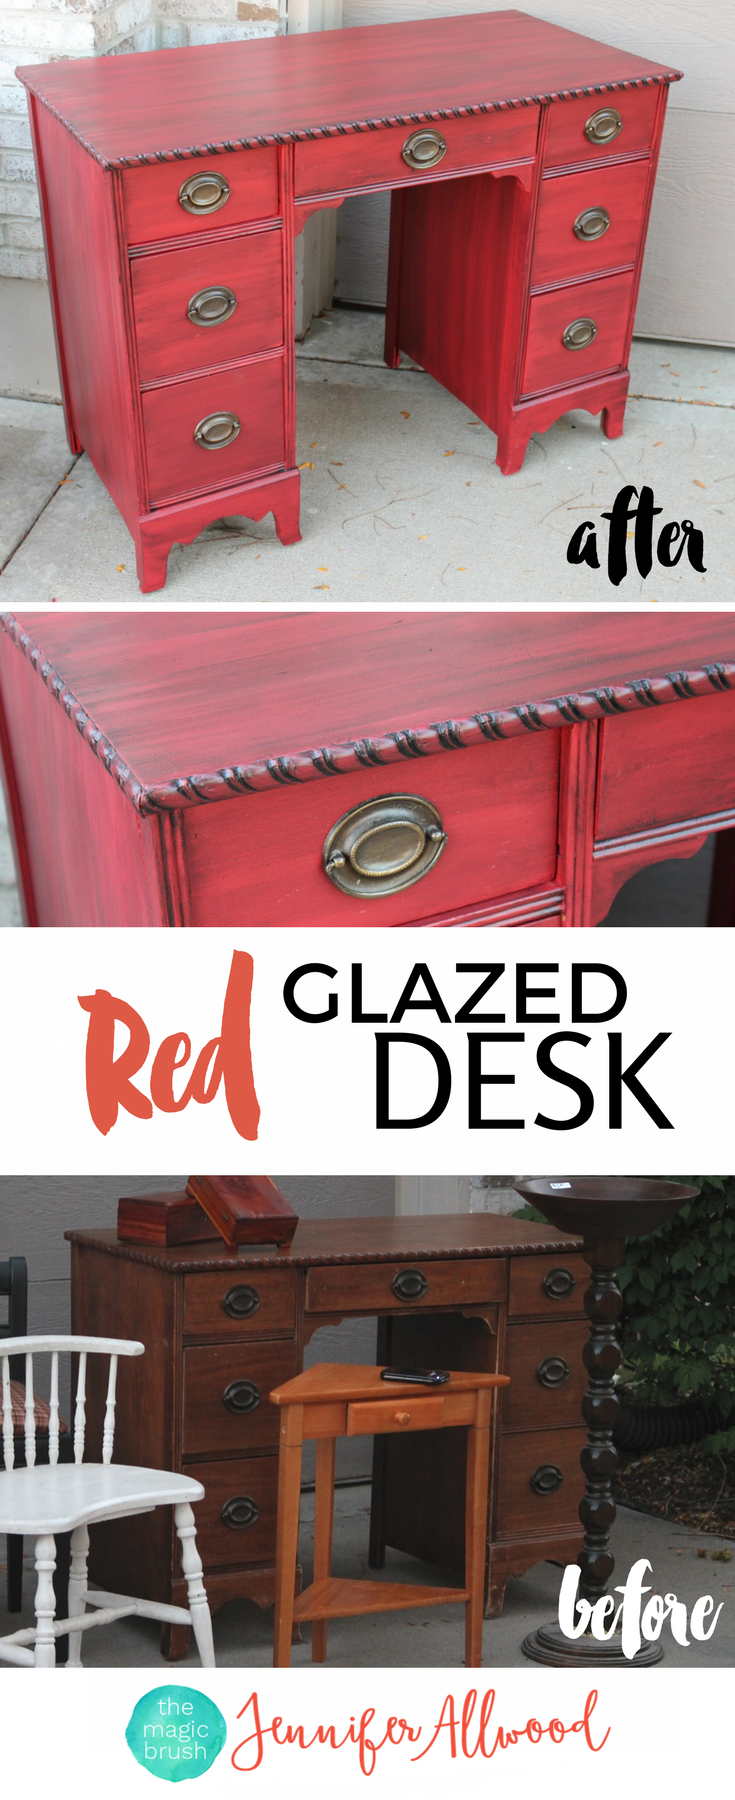 Red Glazed Desk Makeover by Jennifer Allwood | HOw to Paint Furnitiure | Red Painted Furniture Ideas | Red Bay Sherwin Williams | Glazed Furniture | Painted Desk Furniture Before and After